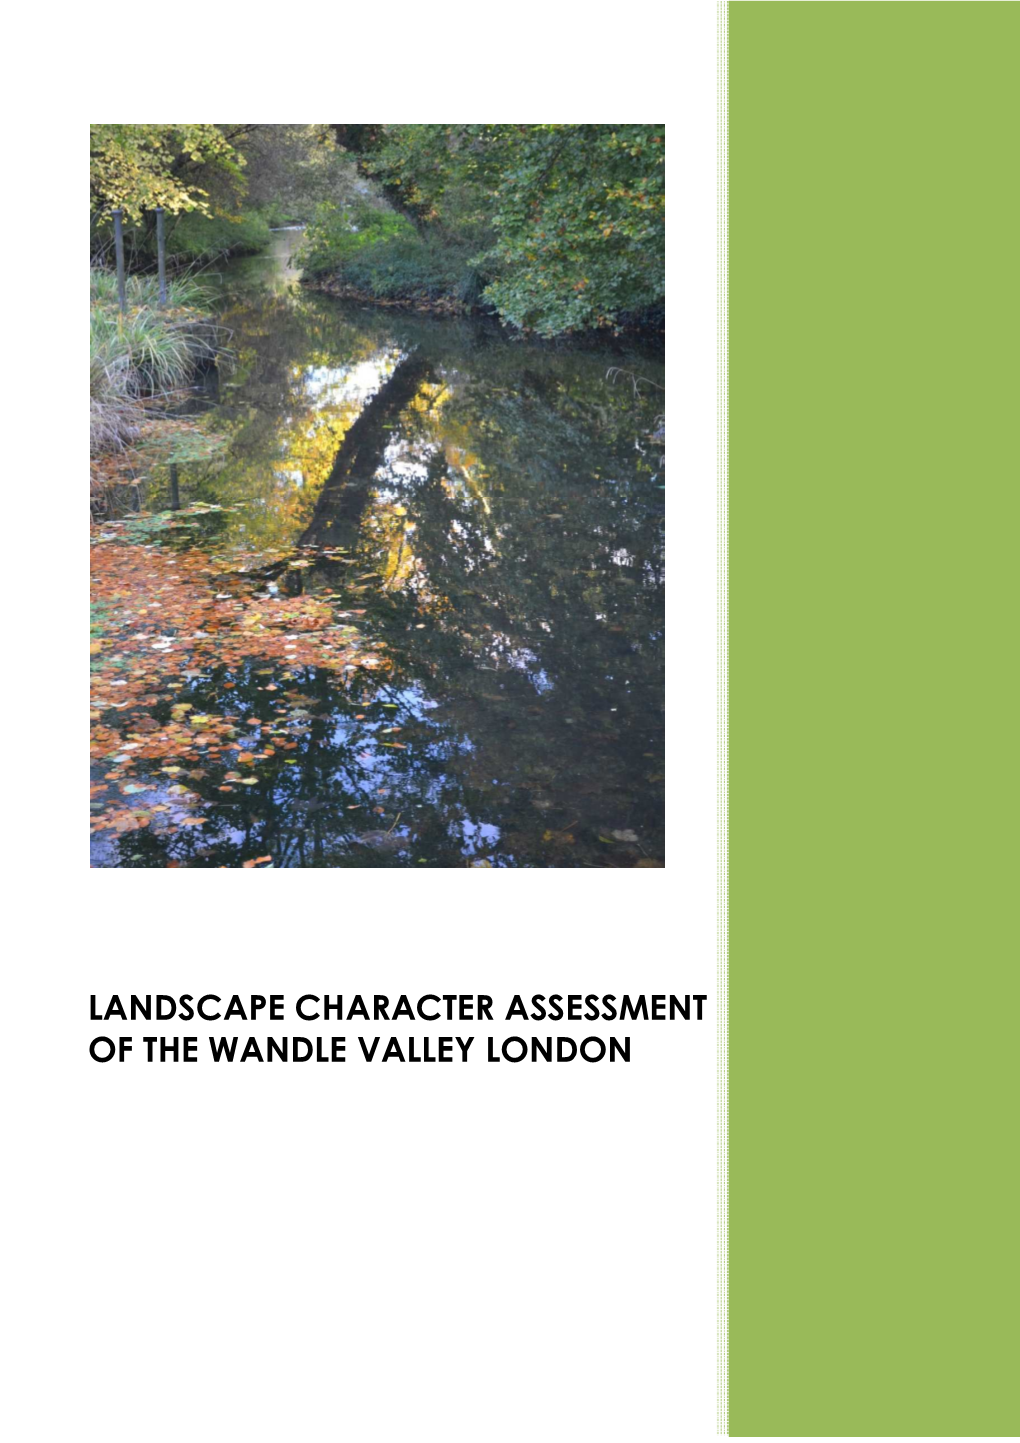 Landscape Character Assessment of the Wandle Valley London Landscape Character Assessment of the Wandle Valley London